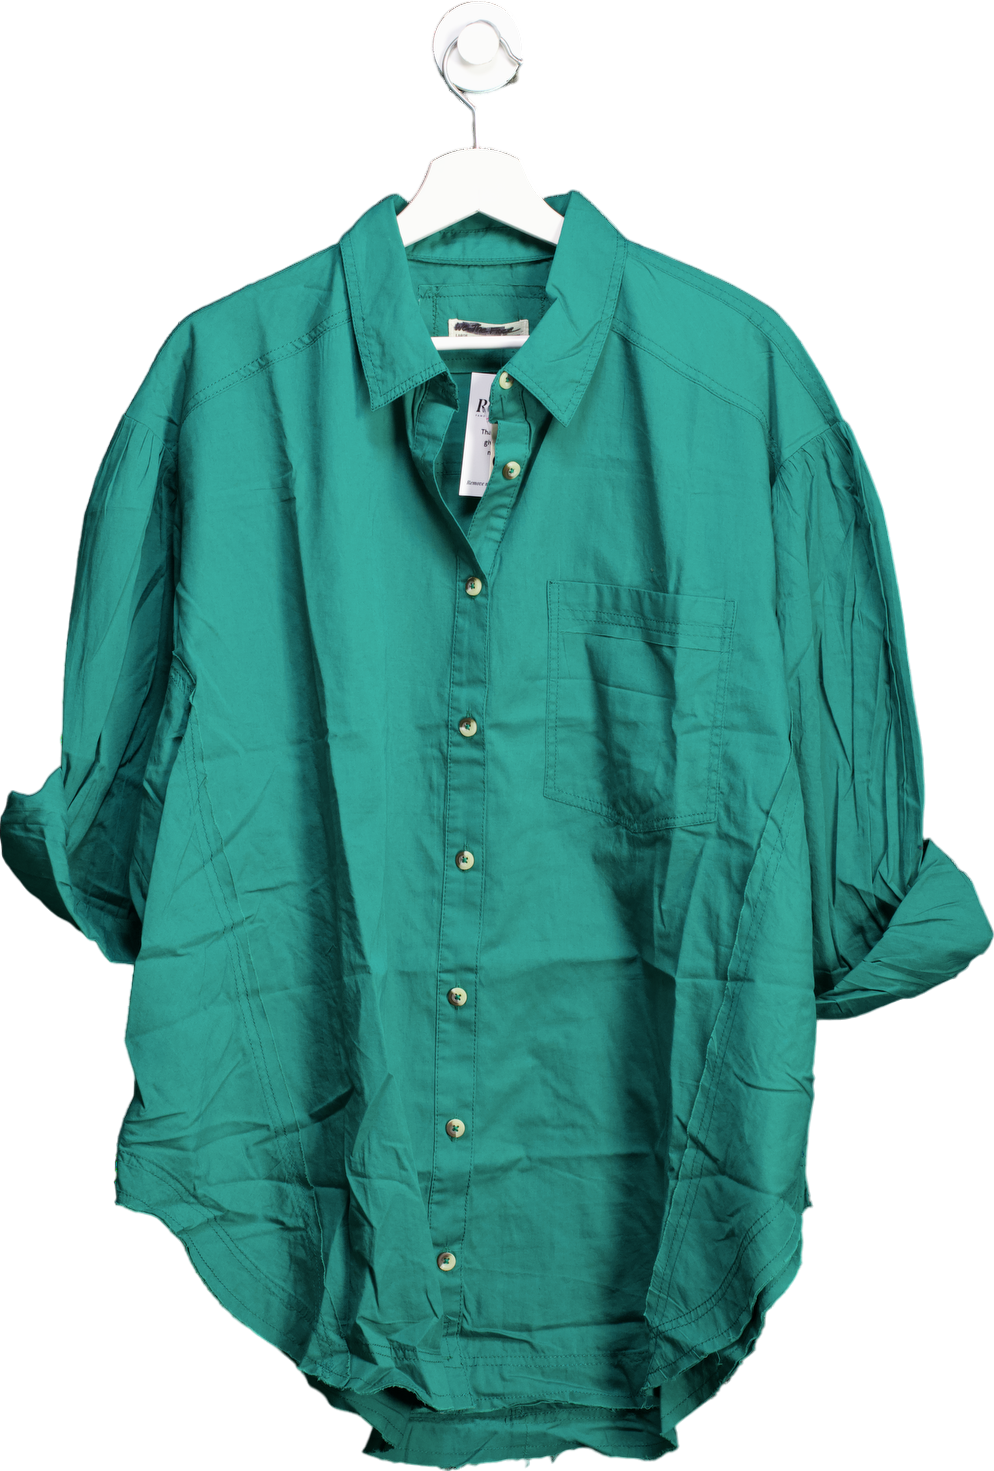 Free People Green Cotton Happy Hour Oversized Shirt UK S